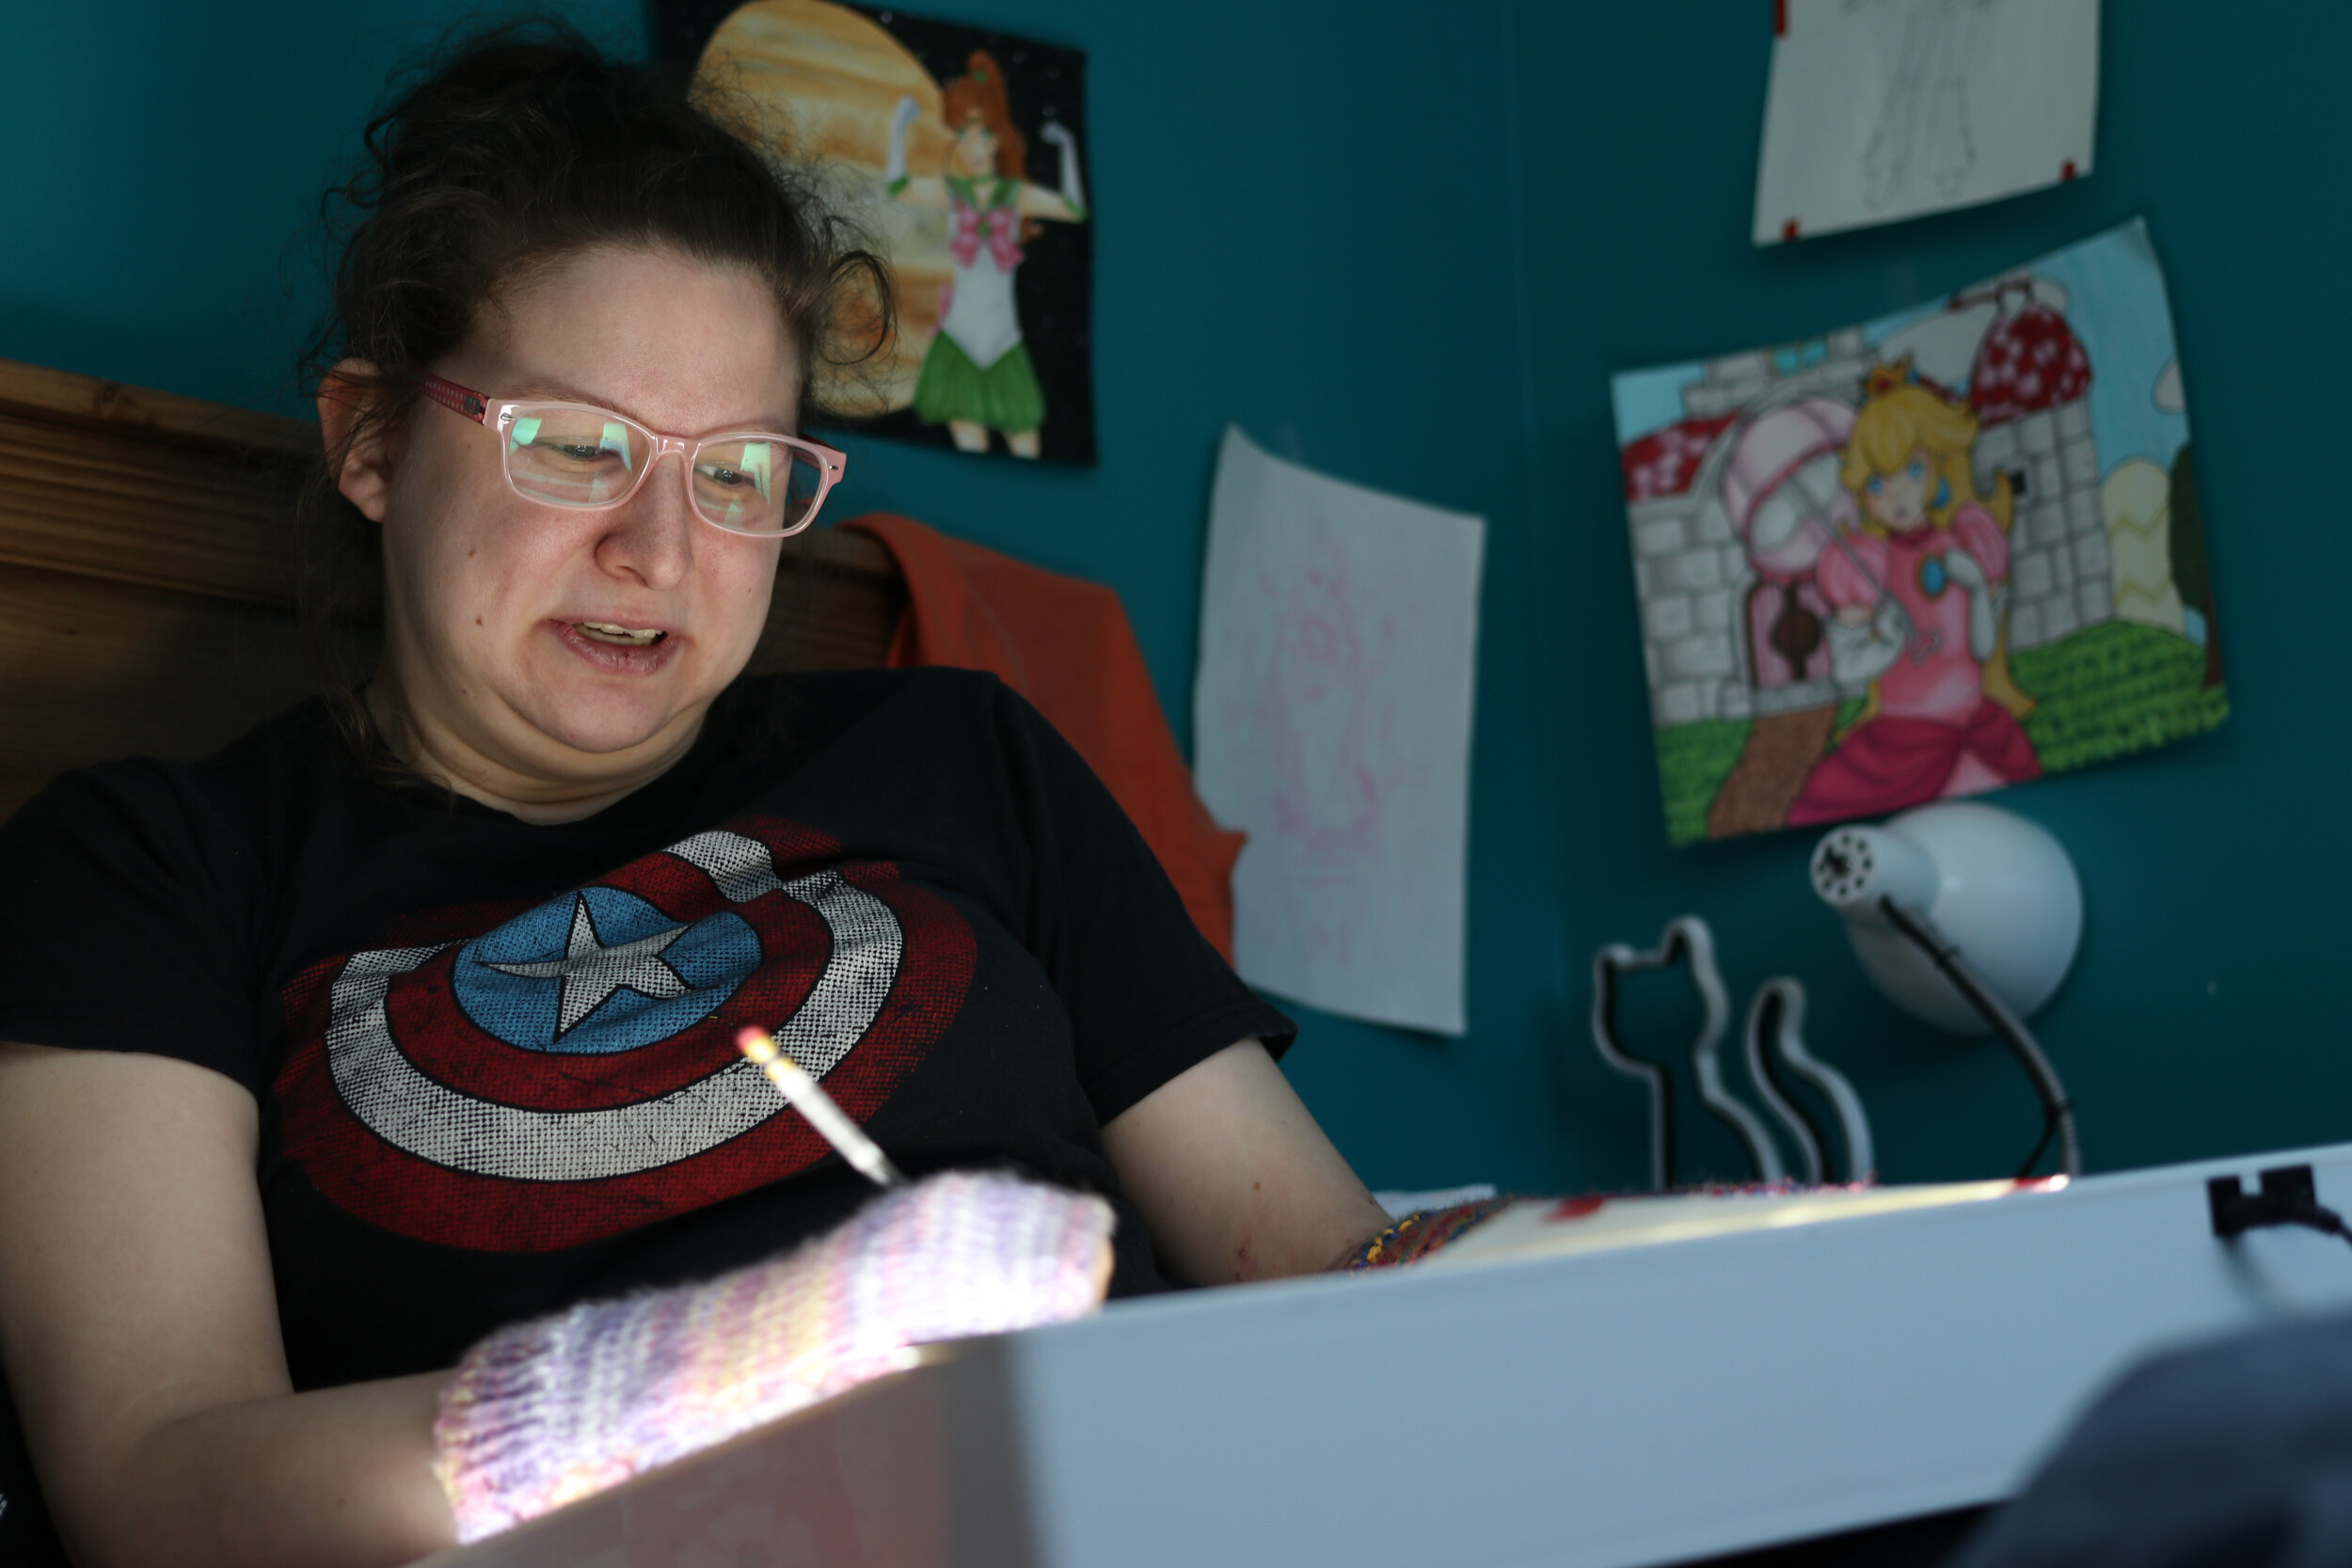  Alyssa Hopper works at her home in Calgary on Saturday, Feb. 9, 2019. She is a local fan artist and cosplayer. 